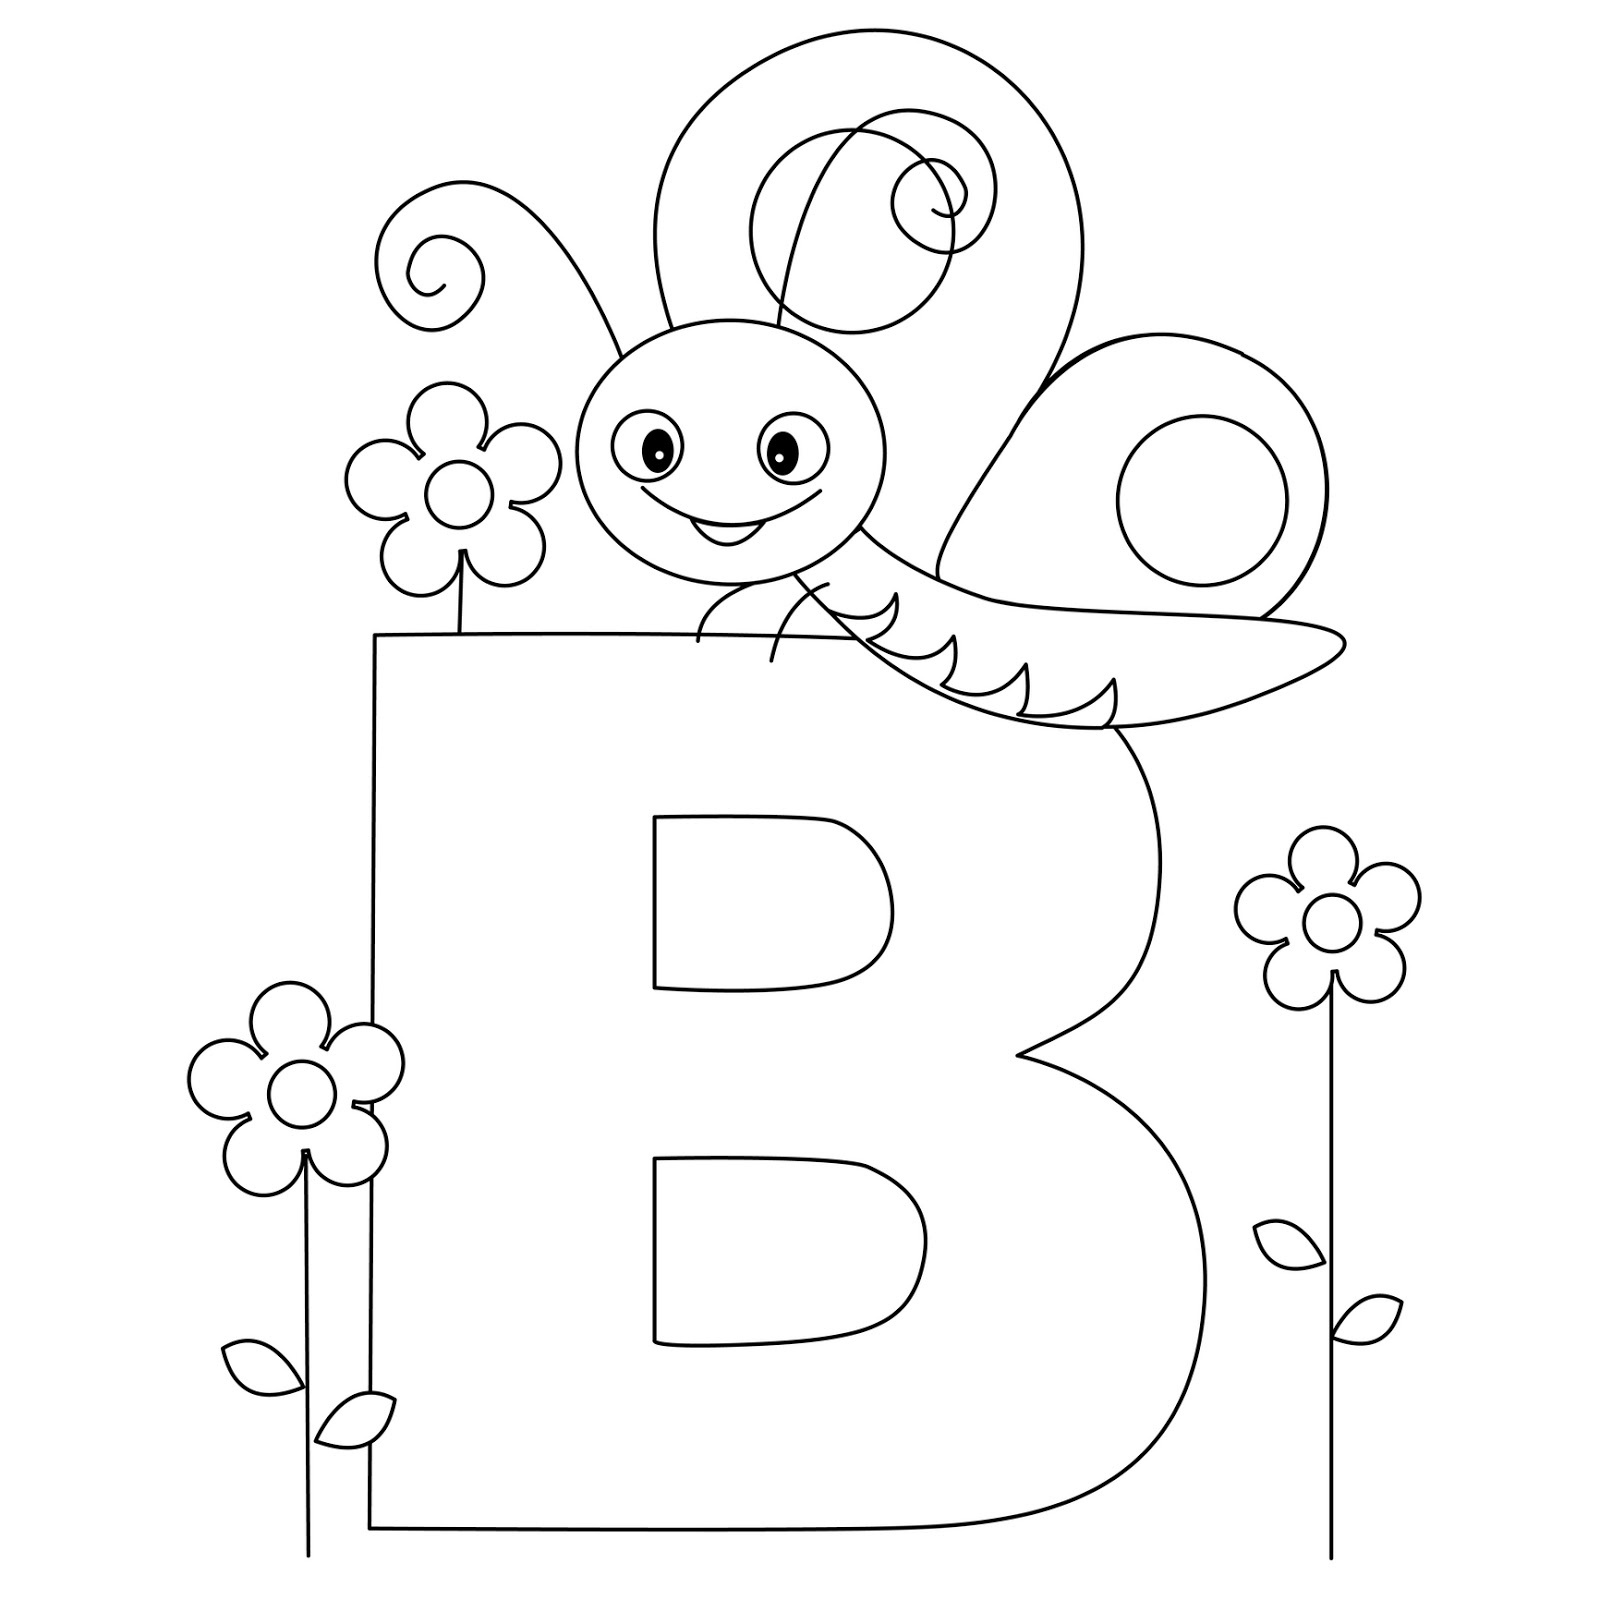 Coloring Pages For Abc - Gmvcontent - Free Alphabet Coloring Printables